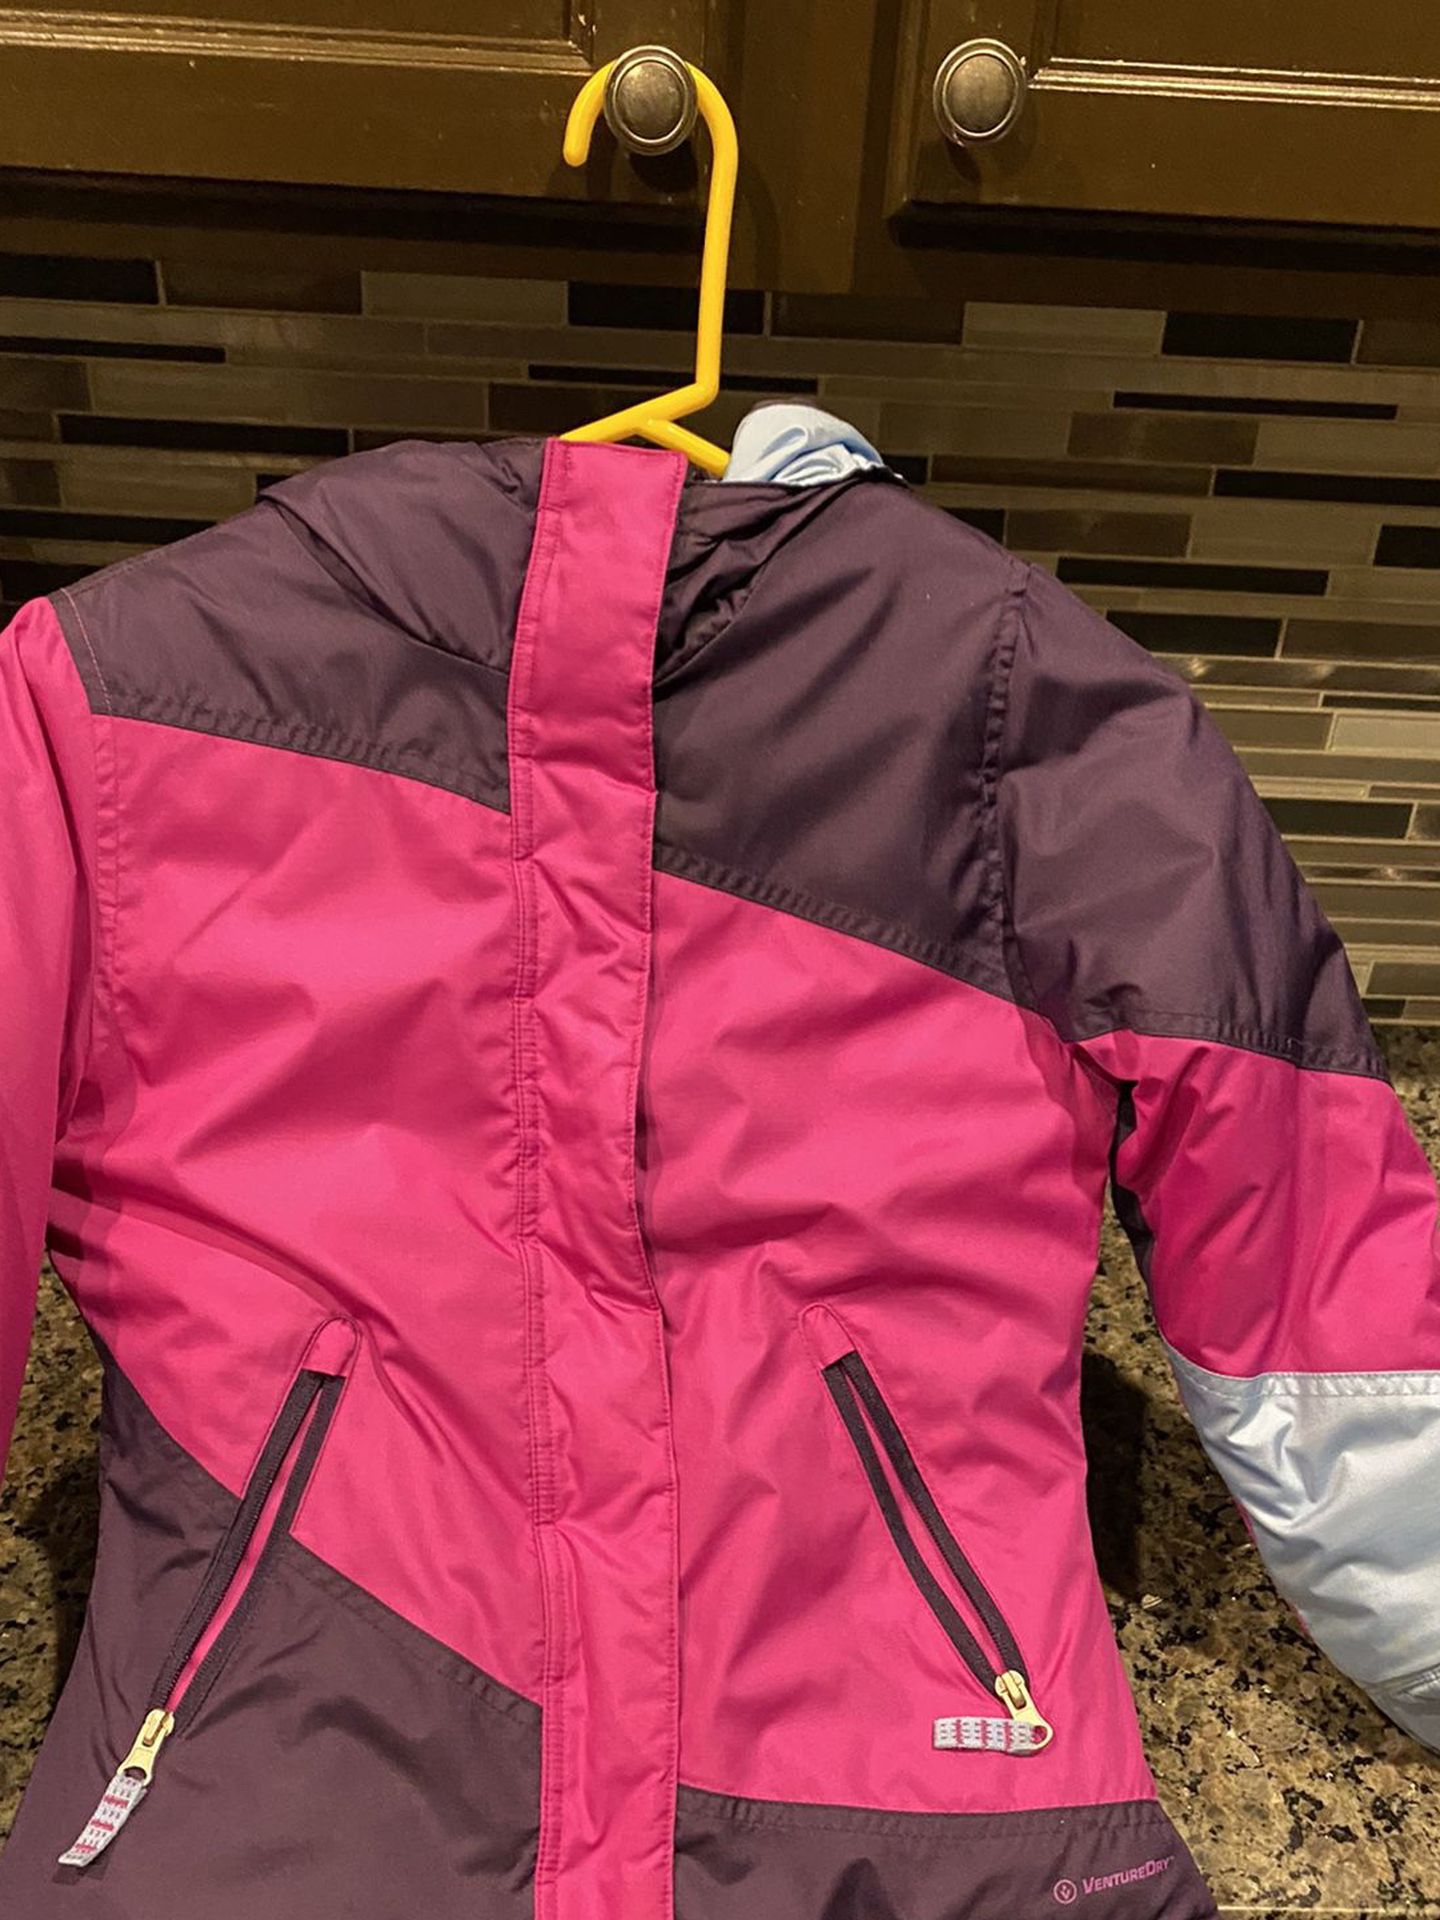 Girls snow jacket and gloves